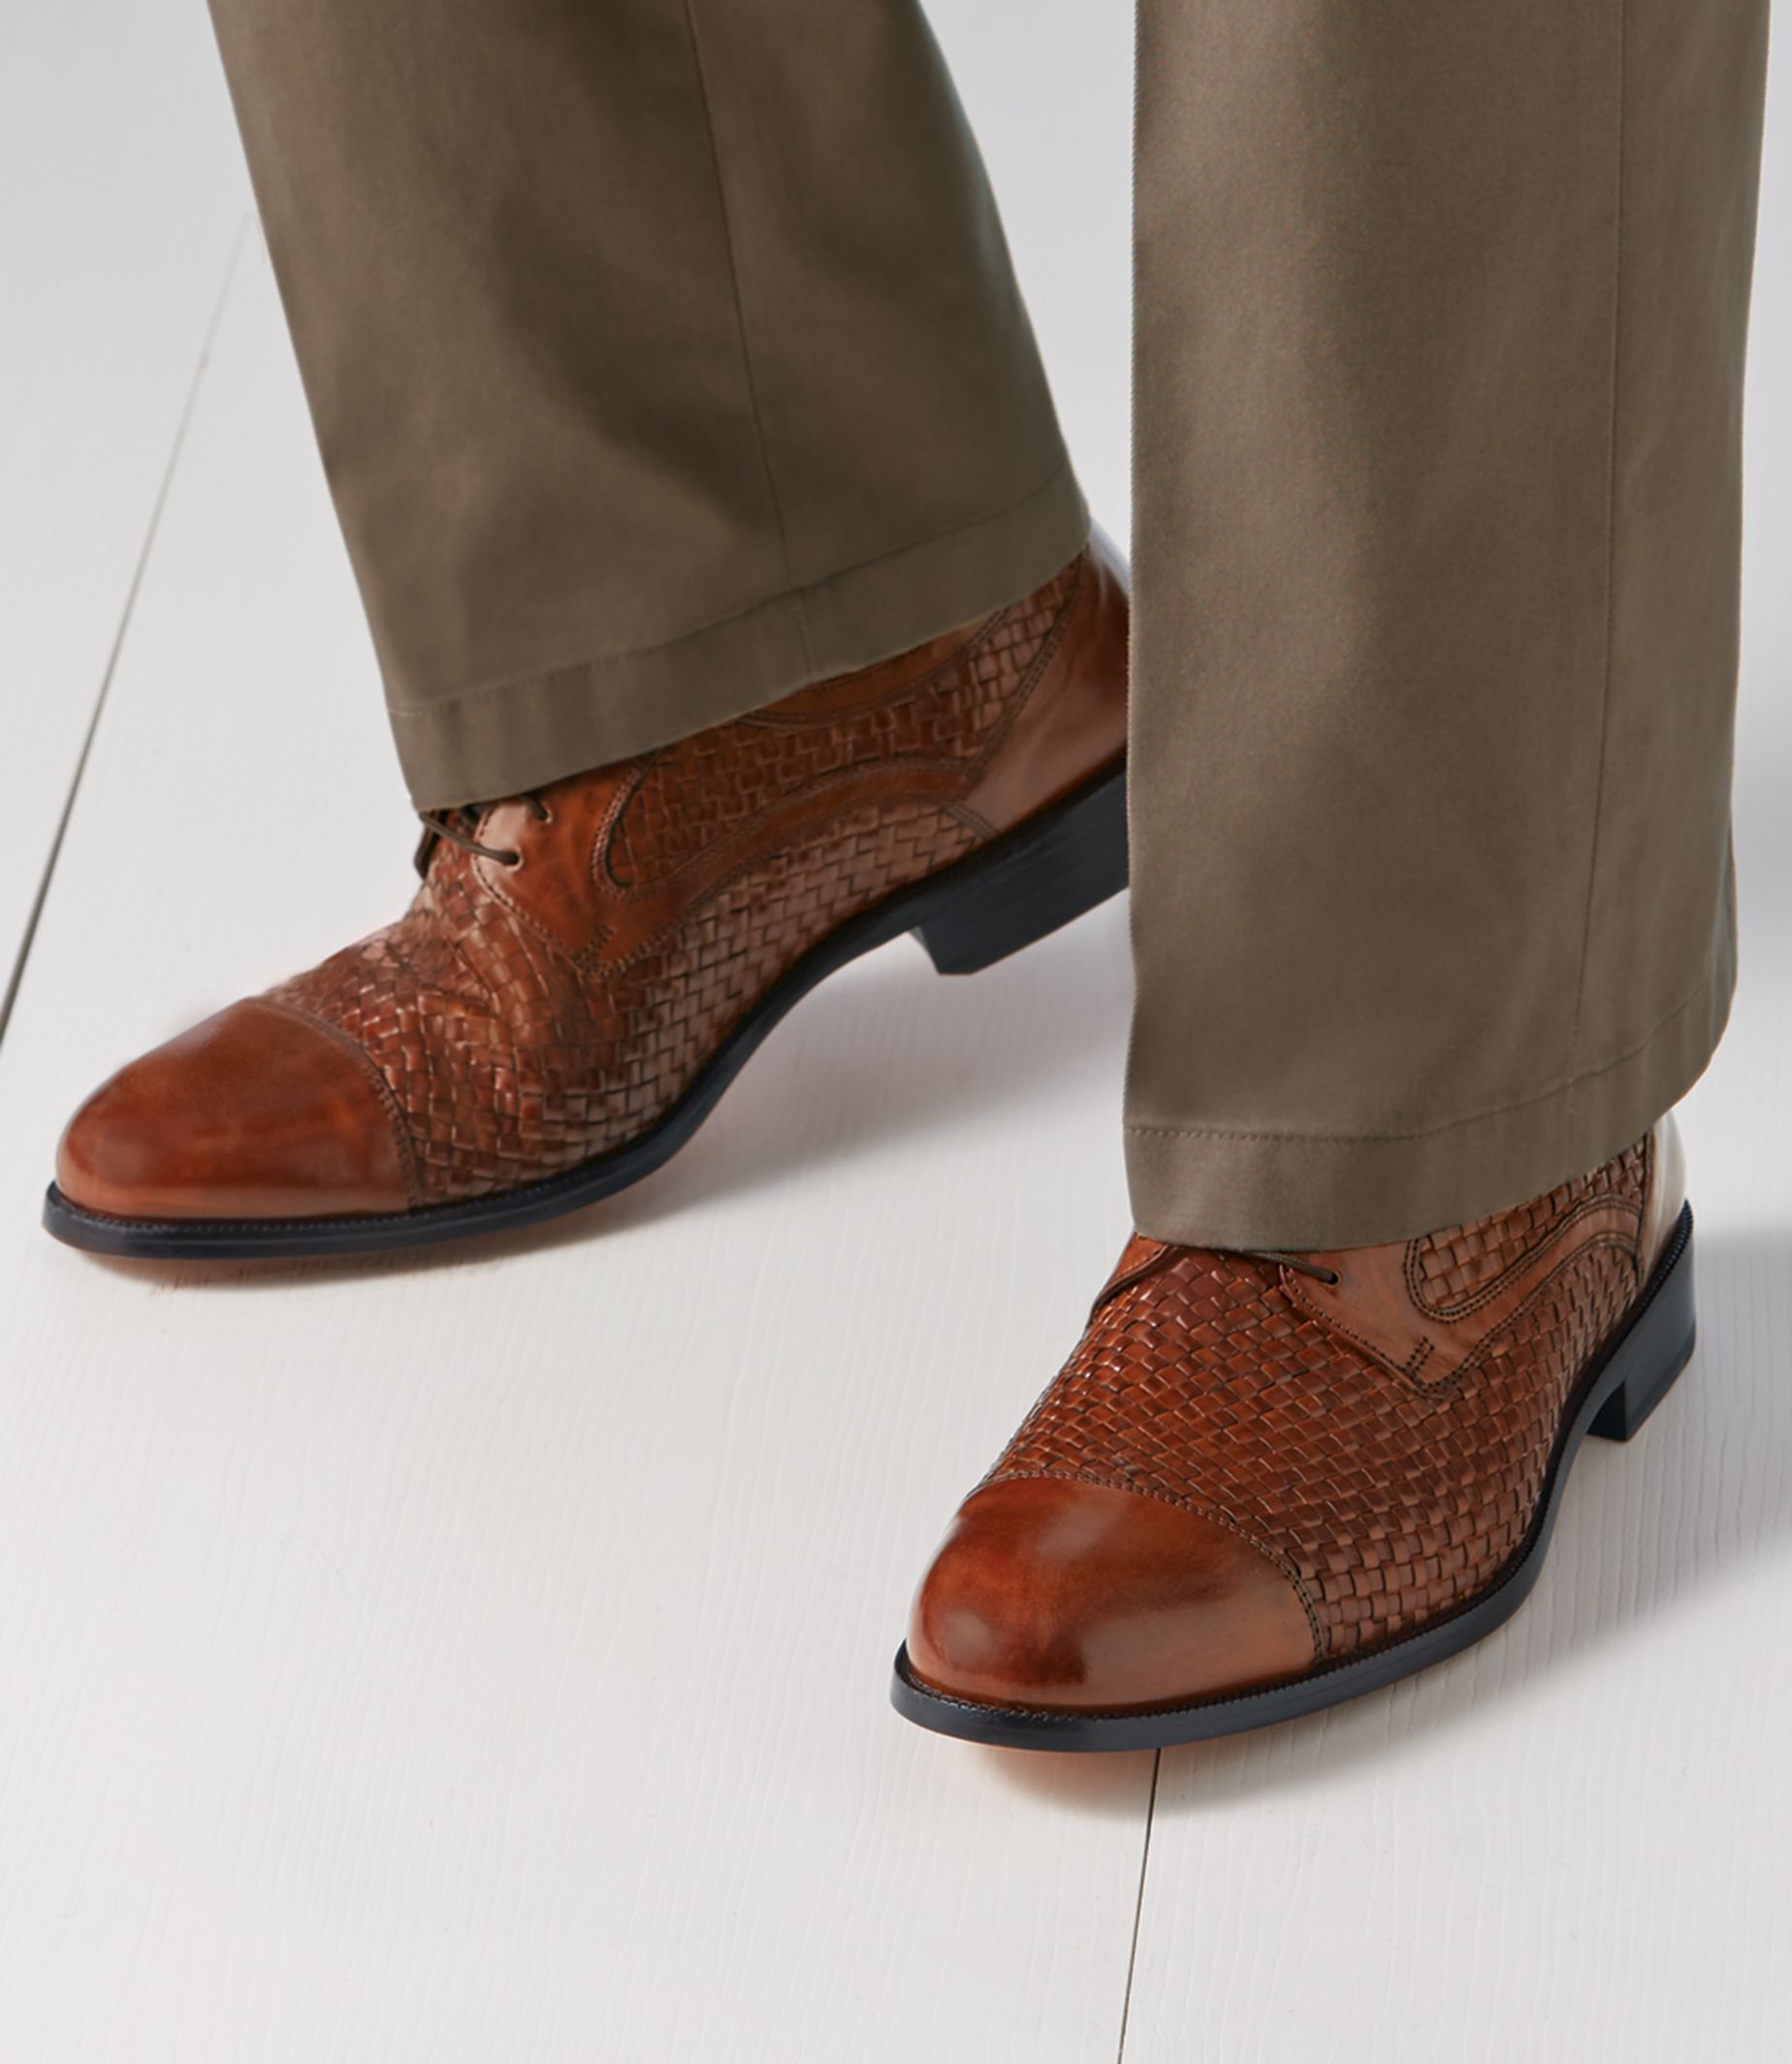 Stratton Woven Cap Toe Shoe by Johnston and Murphy